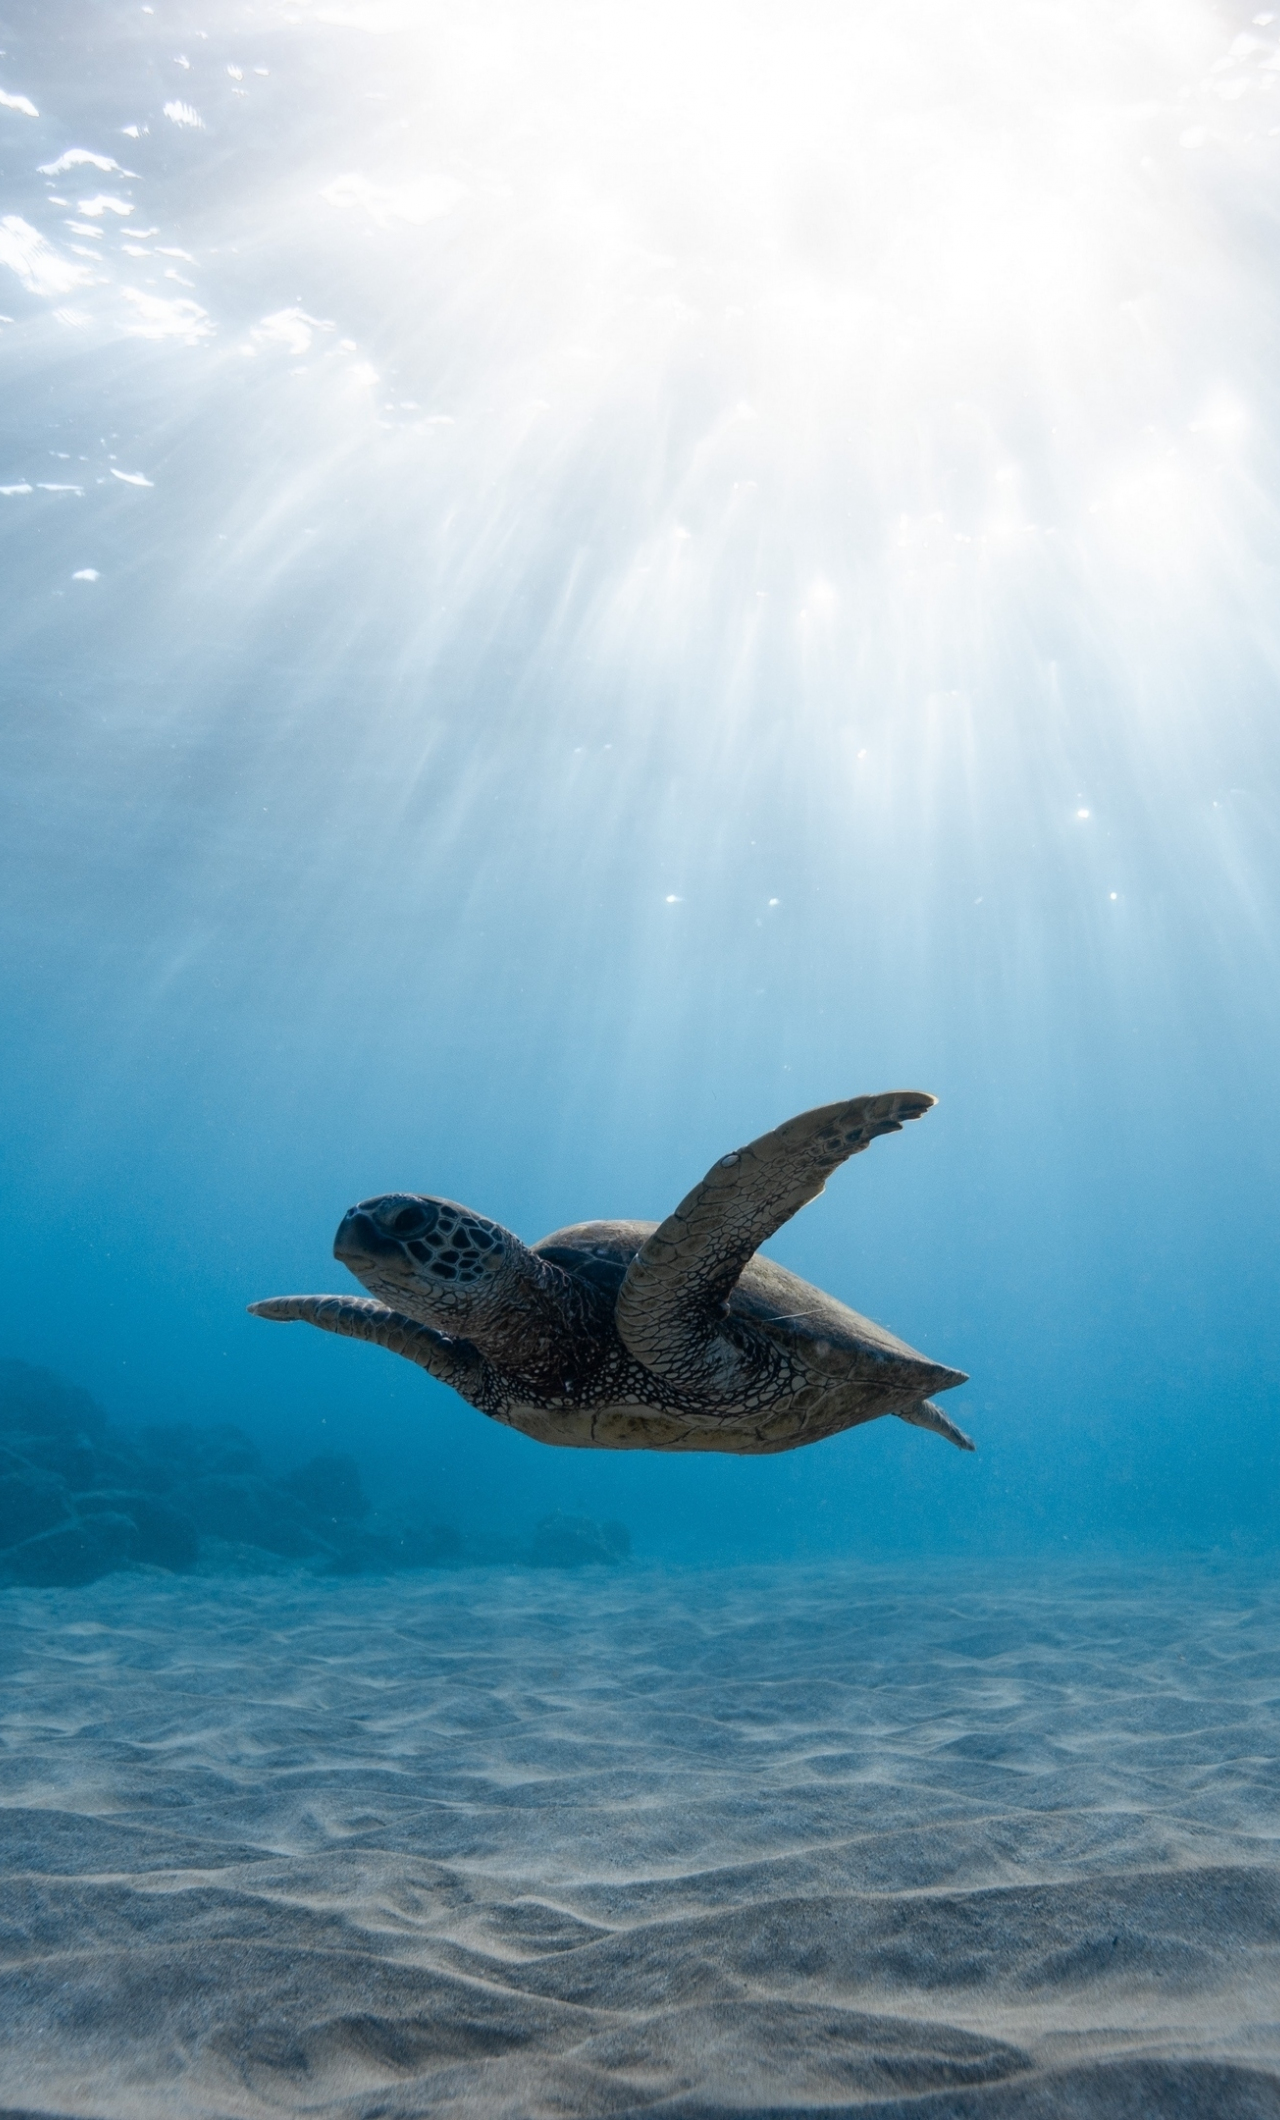 Download underwater life, turtle, blue sea 1280x2120 wallpaper, iphone 6 plus, 1280x2120 HD image, background, 26236